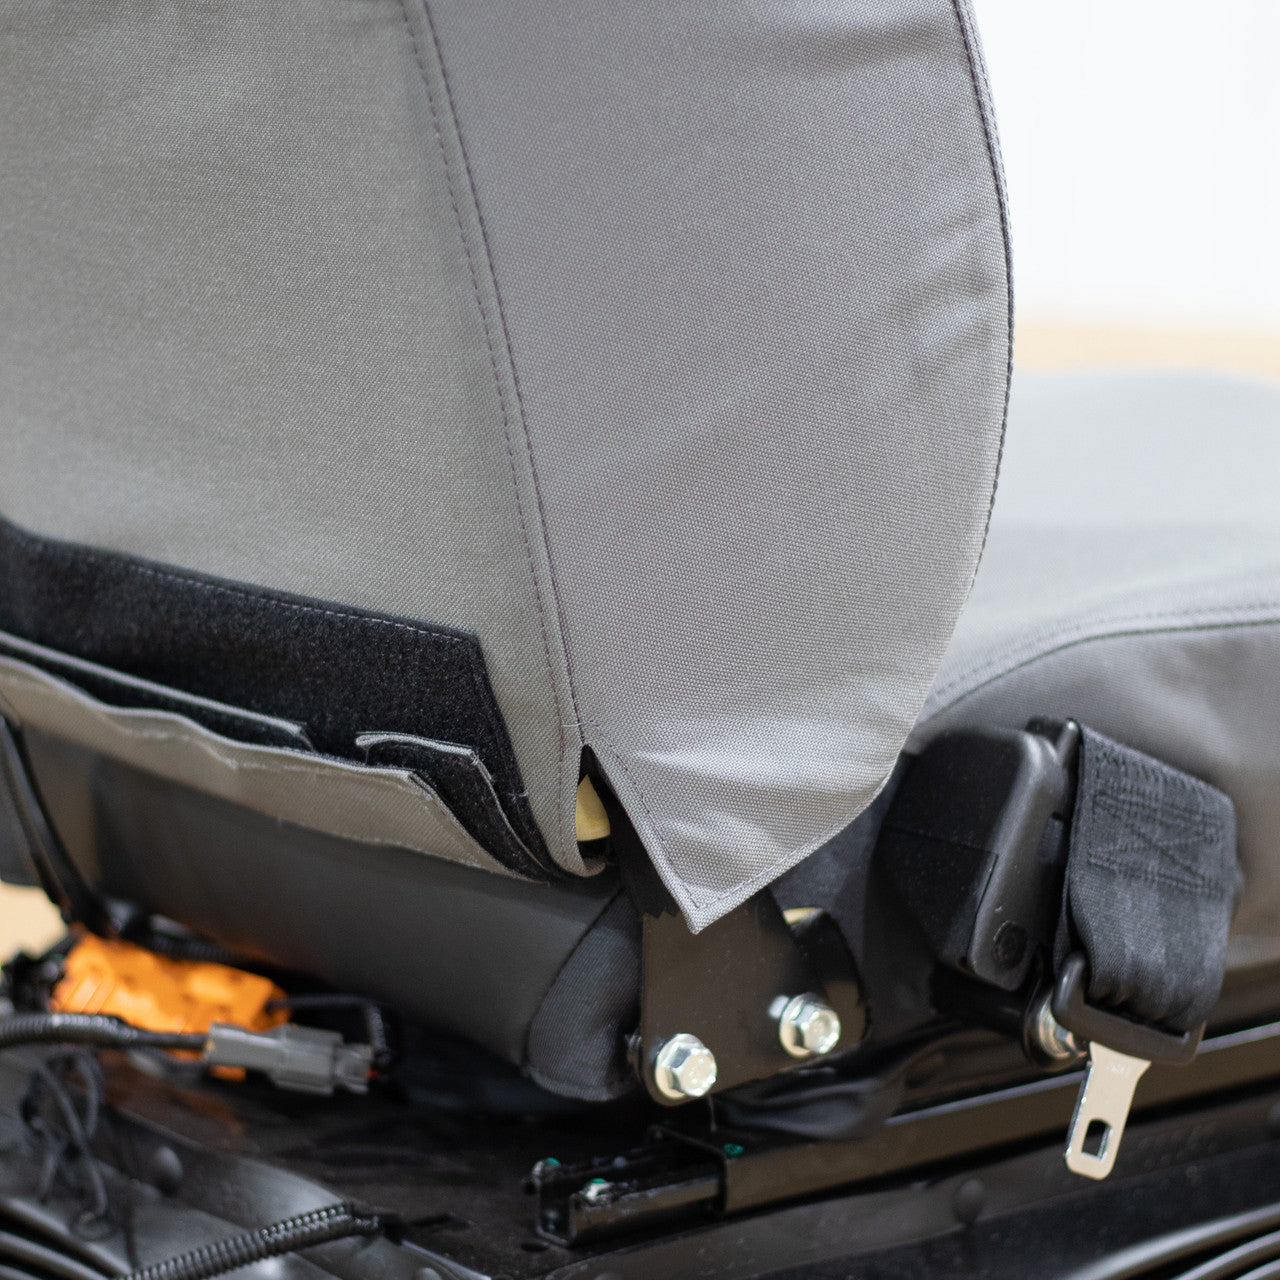 The Case & Link-Belt Excavator Seat Cover fits perfectly; fits tight with no shifting or bunching.